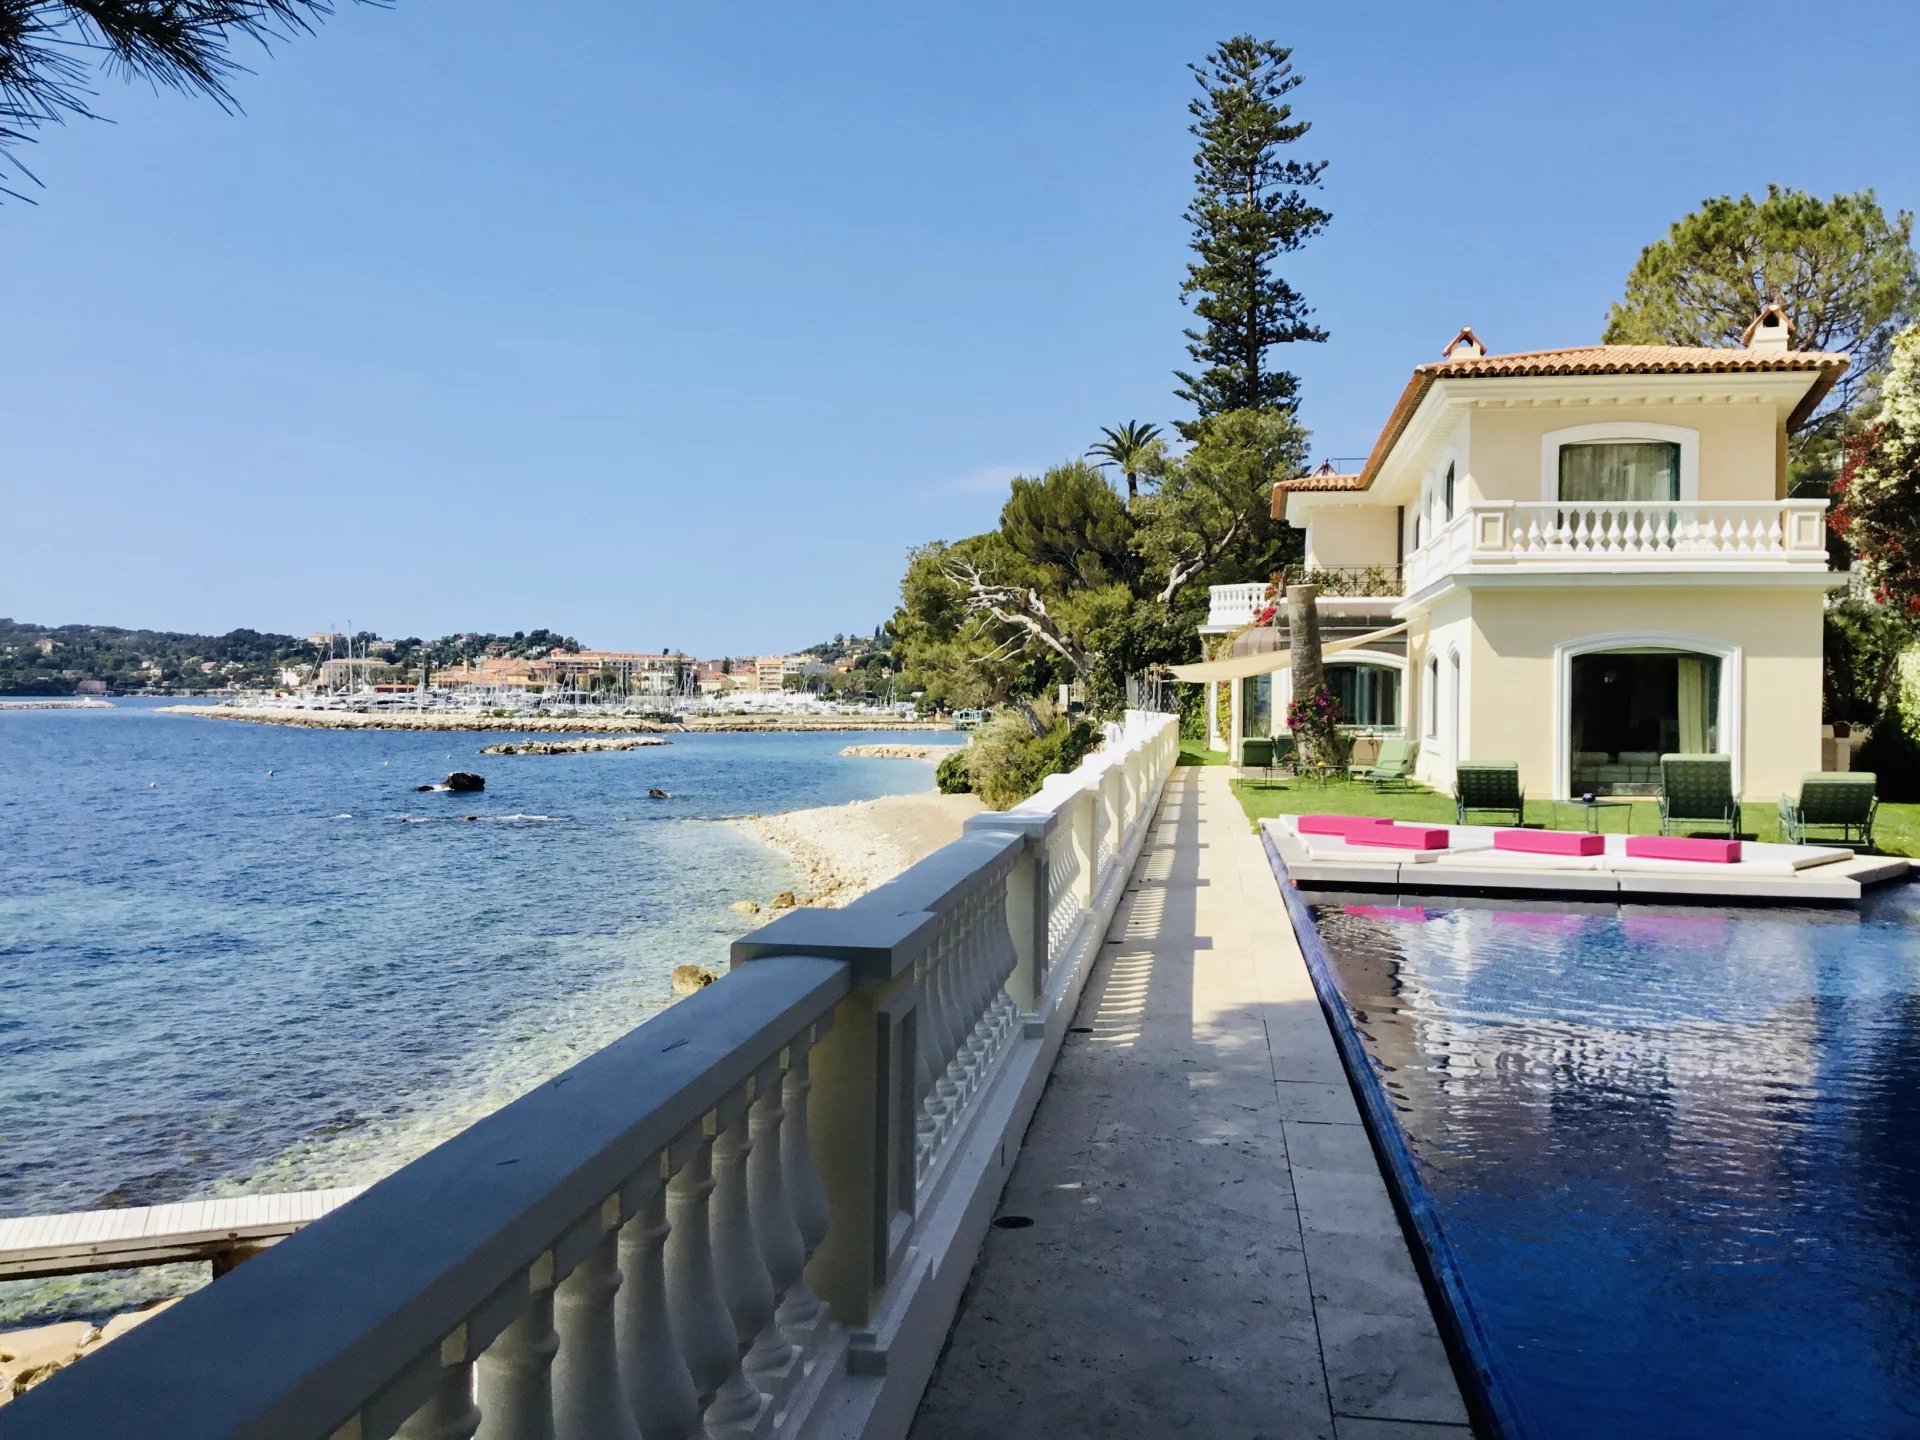 Outstanding Waterfront Holiday Villa Rental in Beaulieu-sur-Mer France